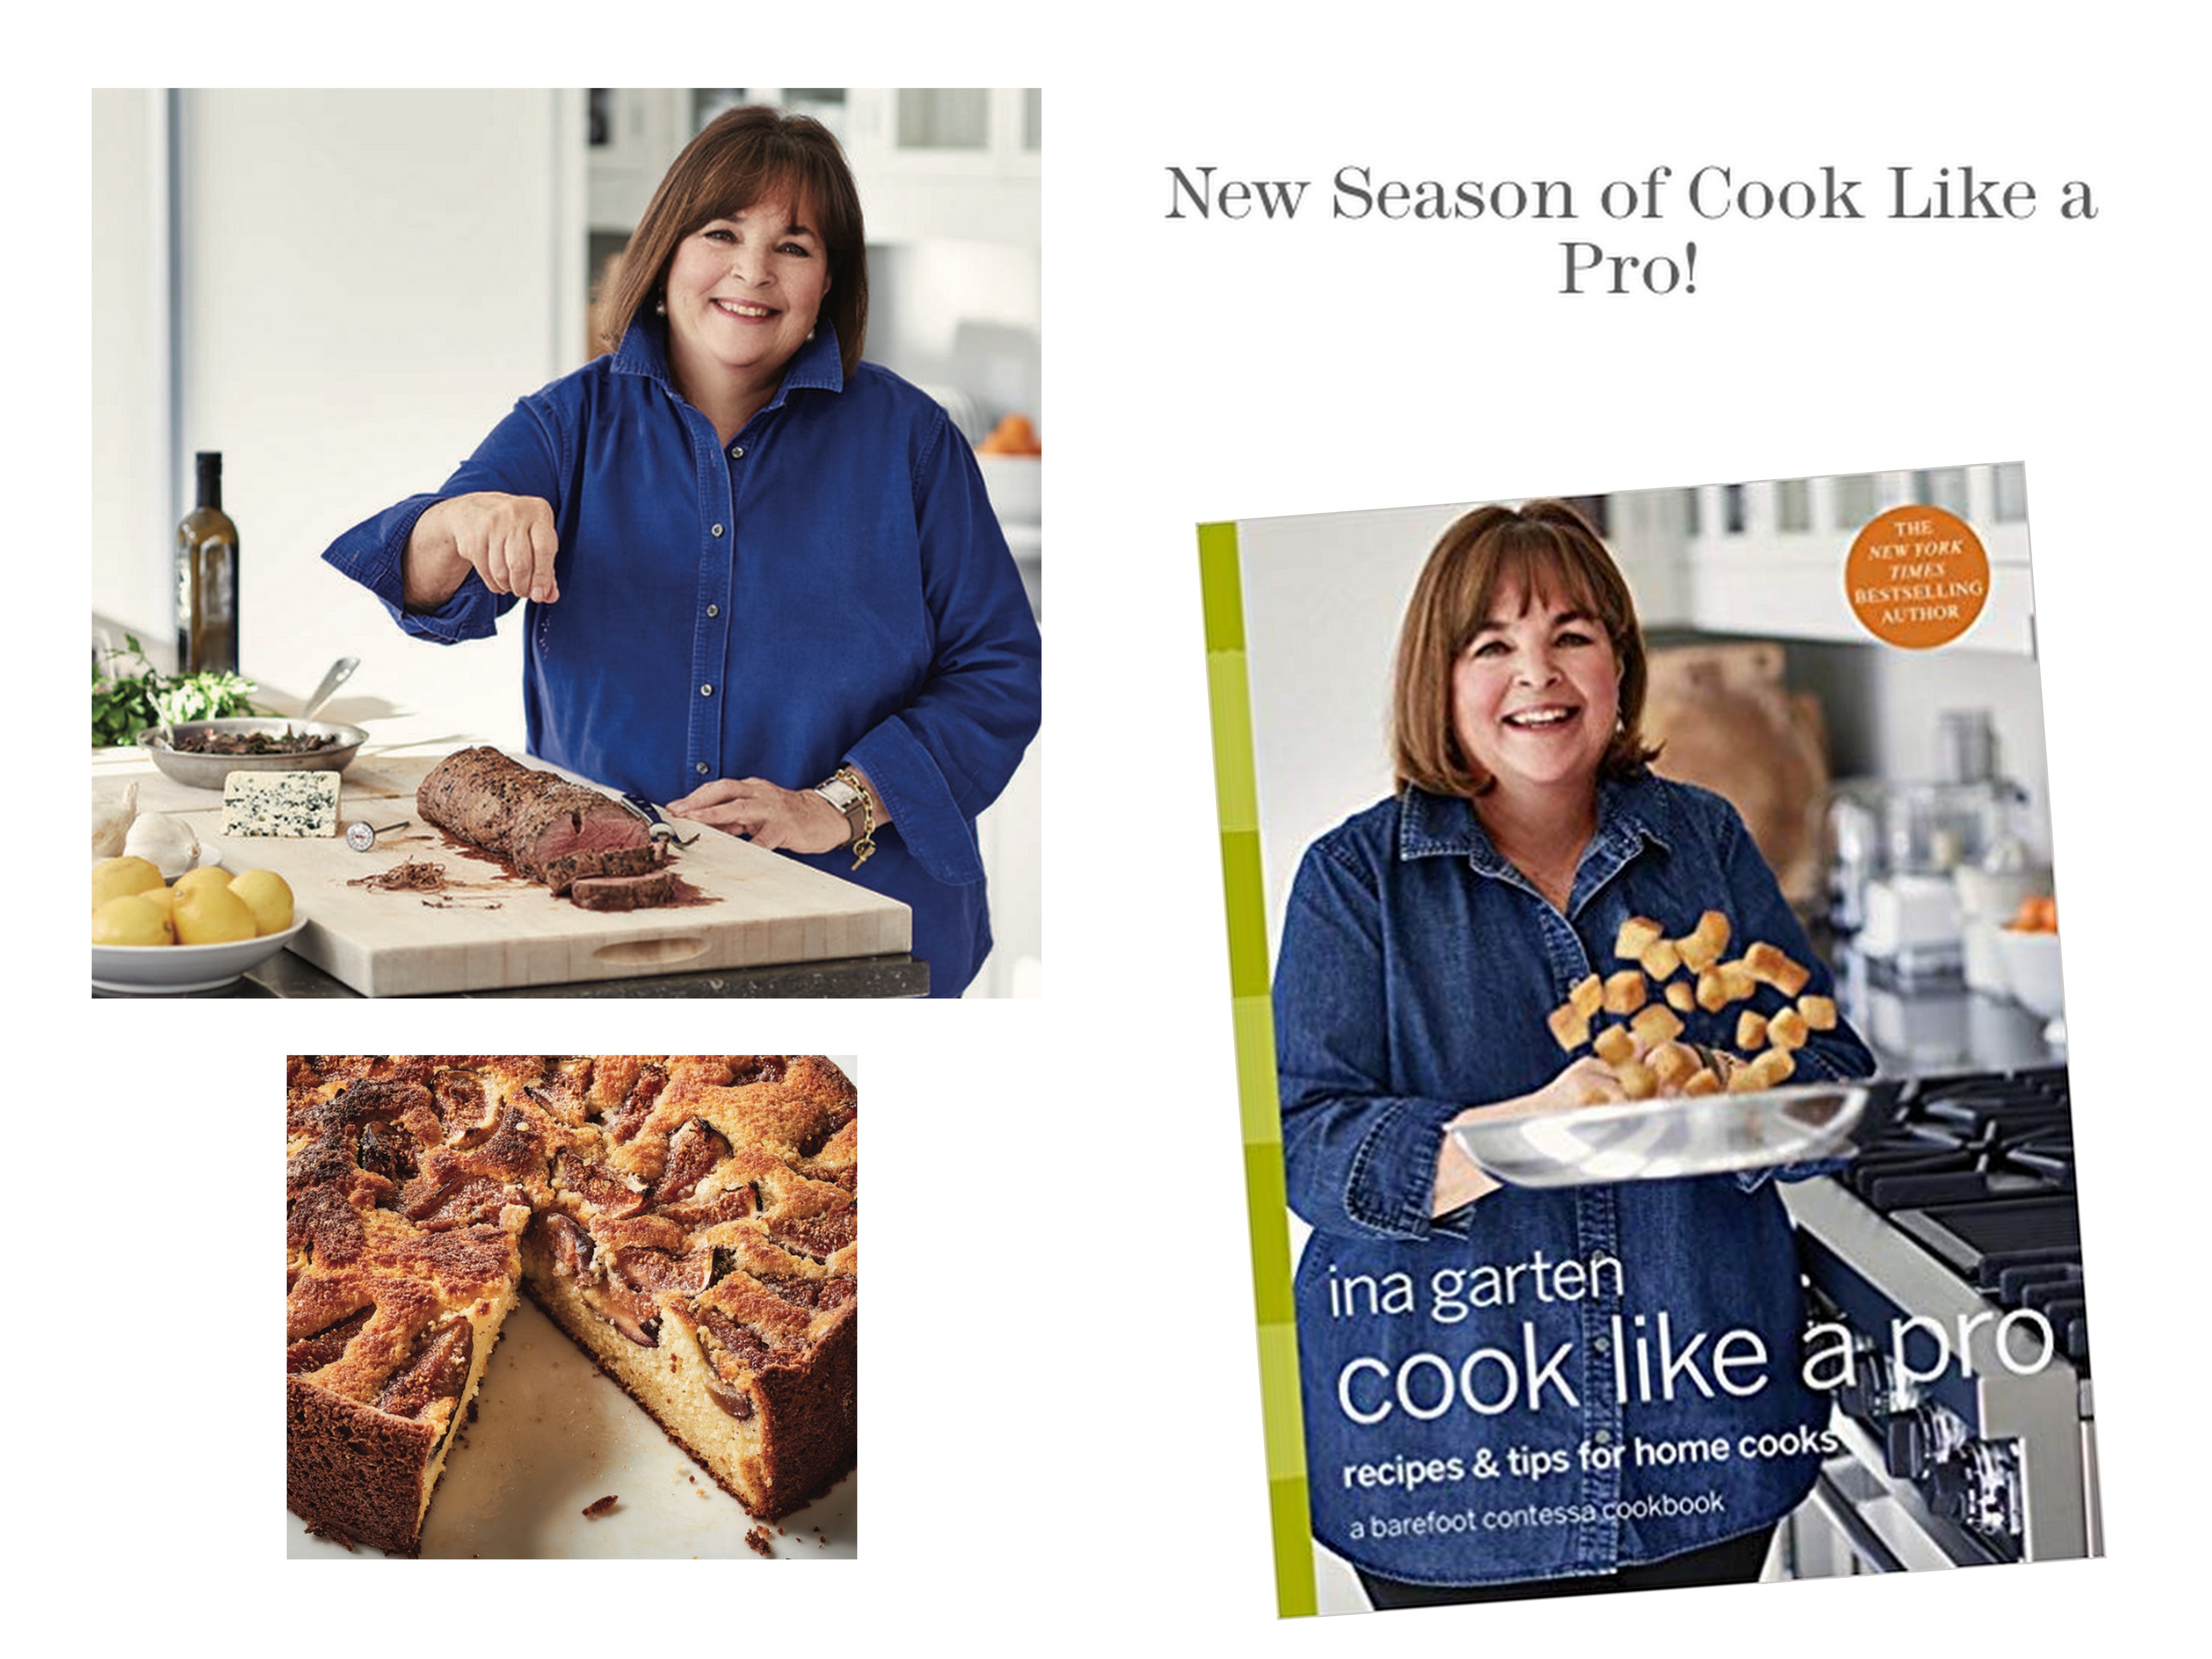 The Barefoot Contessa is Back on Food Network Today! (and a Sur la Table Sale not to miss)